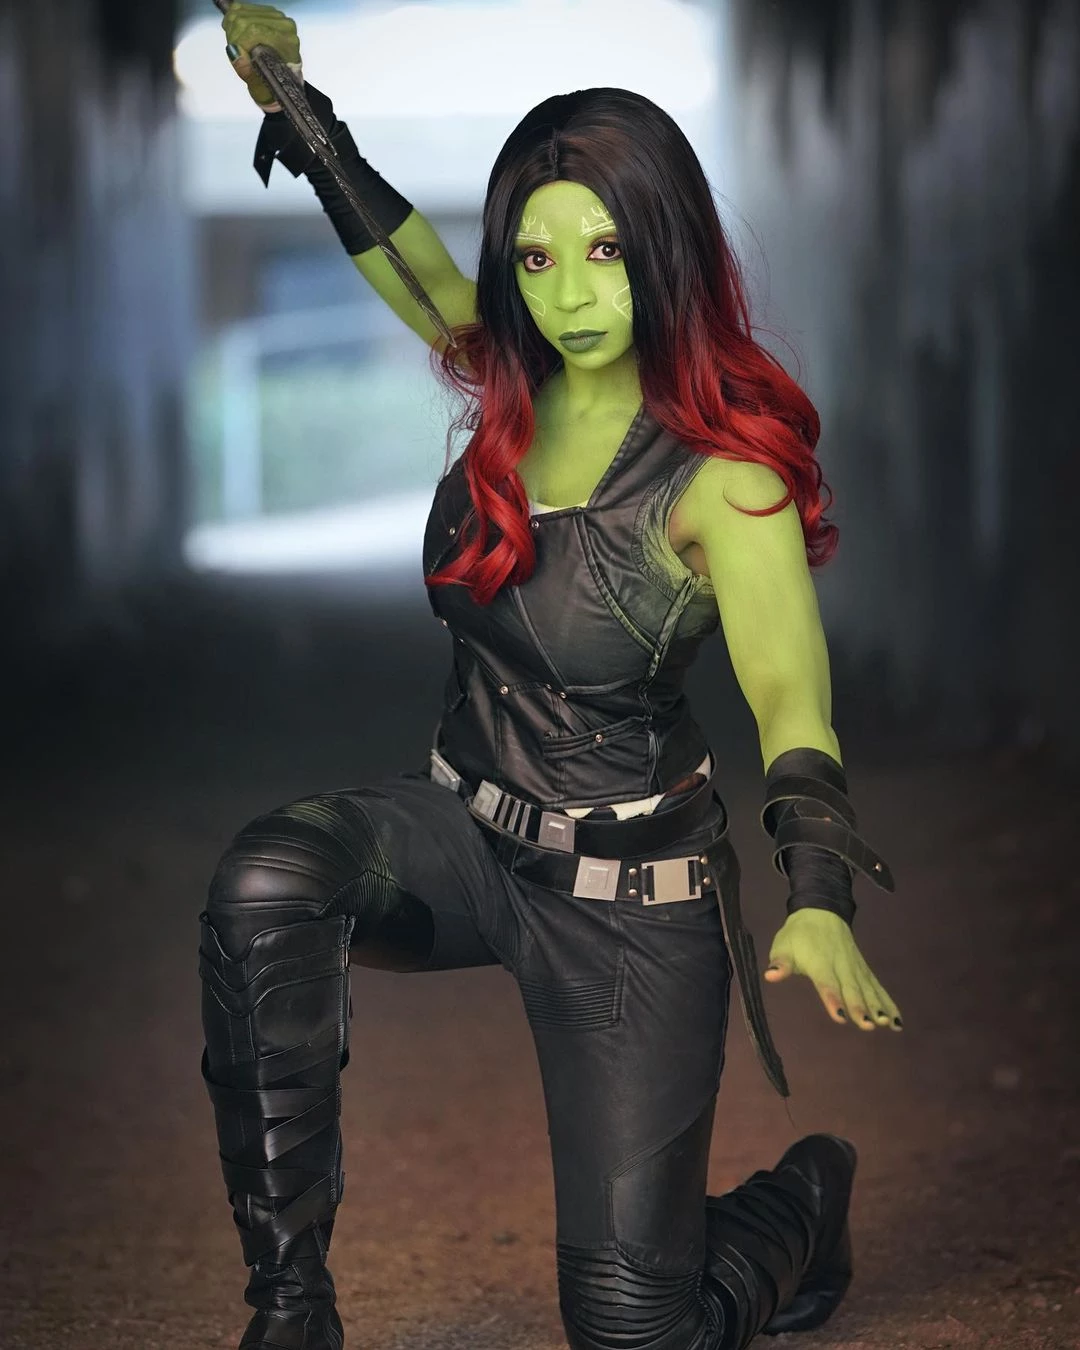 Here’s Kriss In Her Gamora Cosplay. She Even Took Her Time To Apply The Green Makeup On Her Entire Body